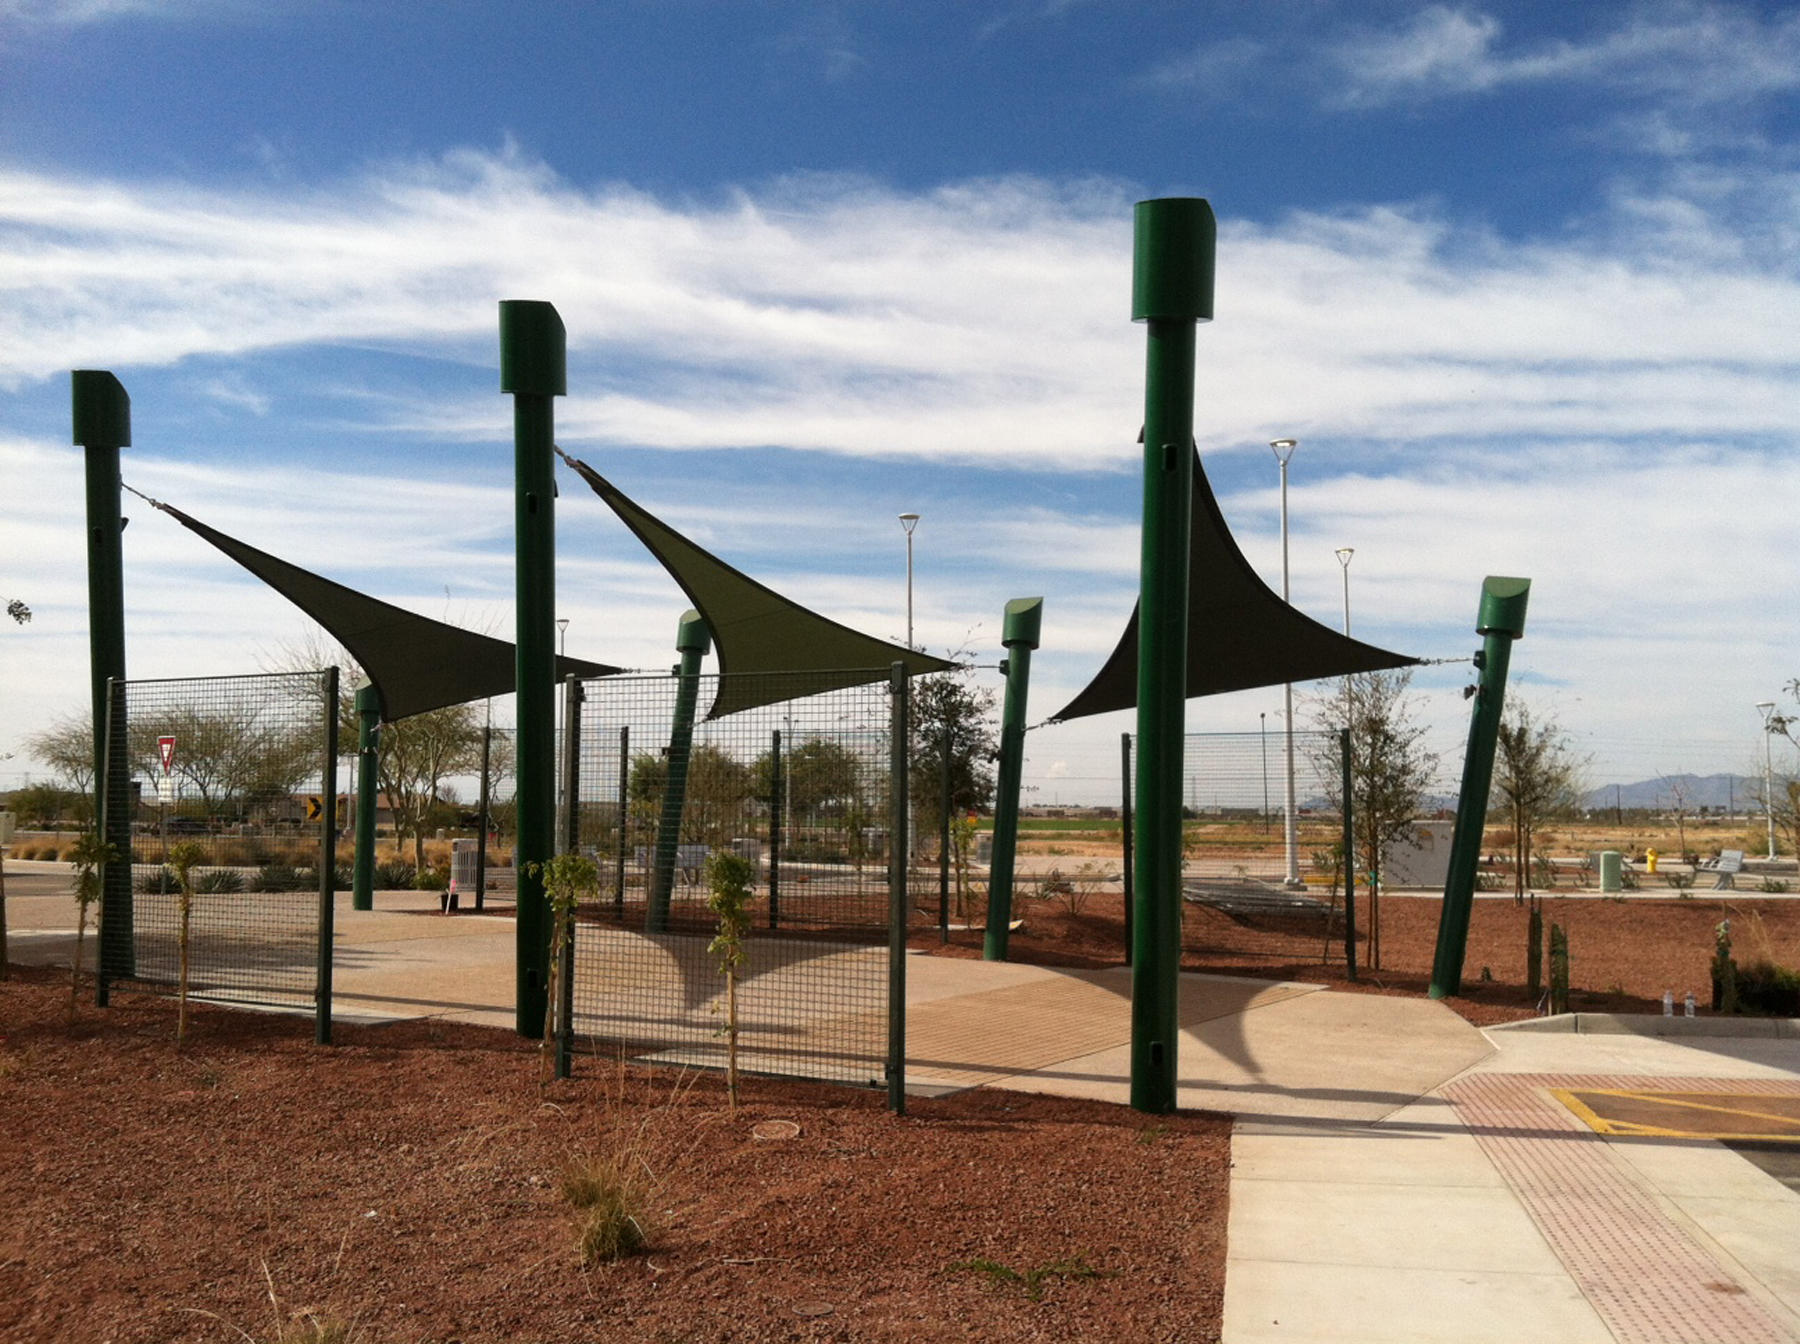 shade structures placed above sidewalk at avondale park